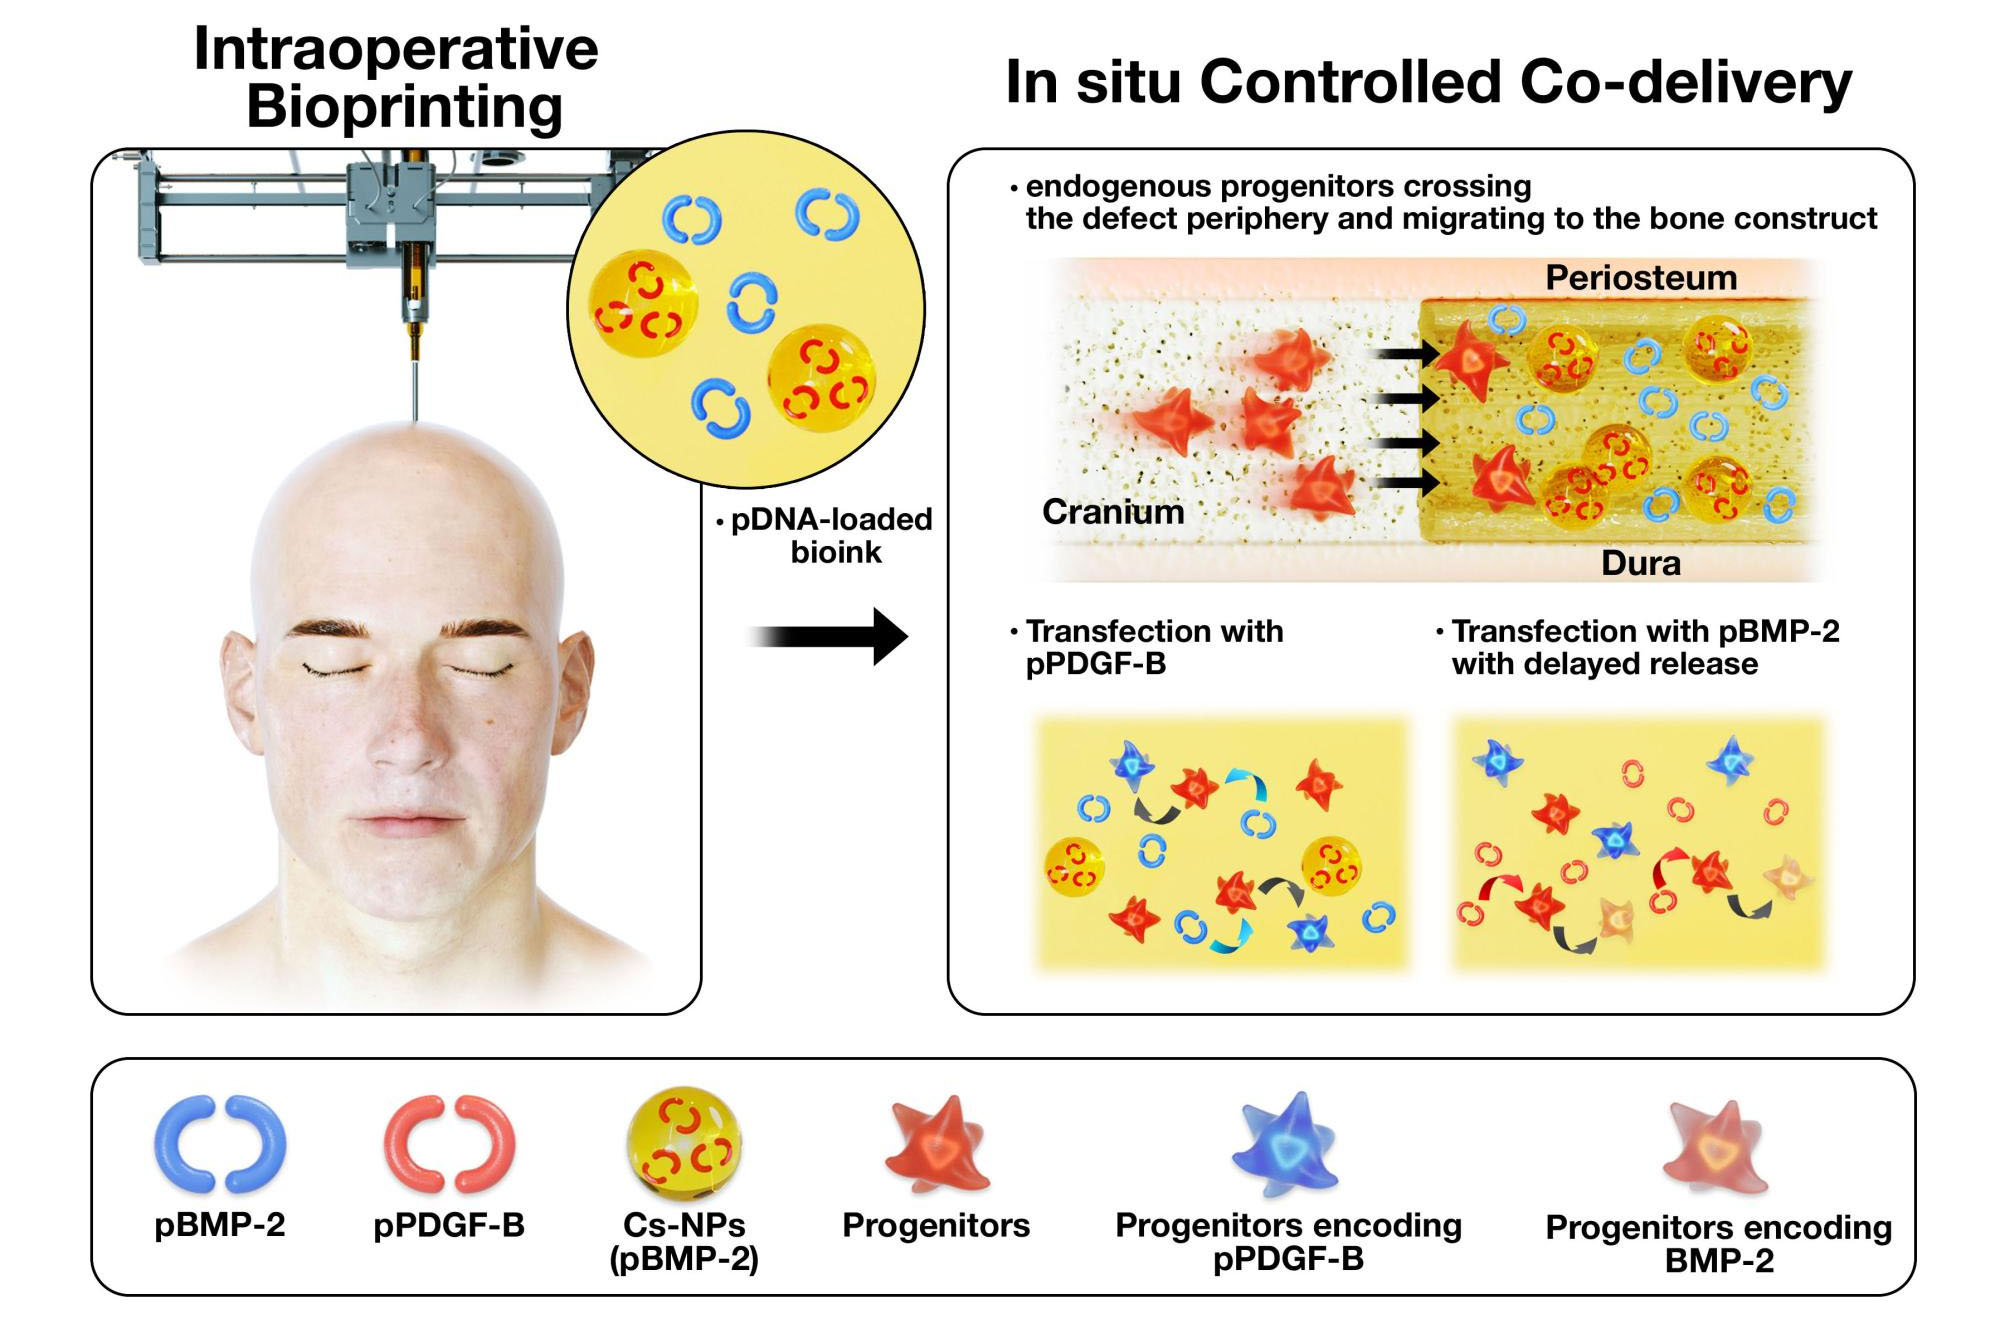 Bioprinting during surgery of bone constructs used as a controlled gene co-delivery platform for the repair of skull defects